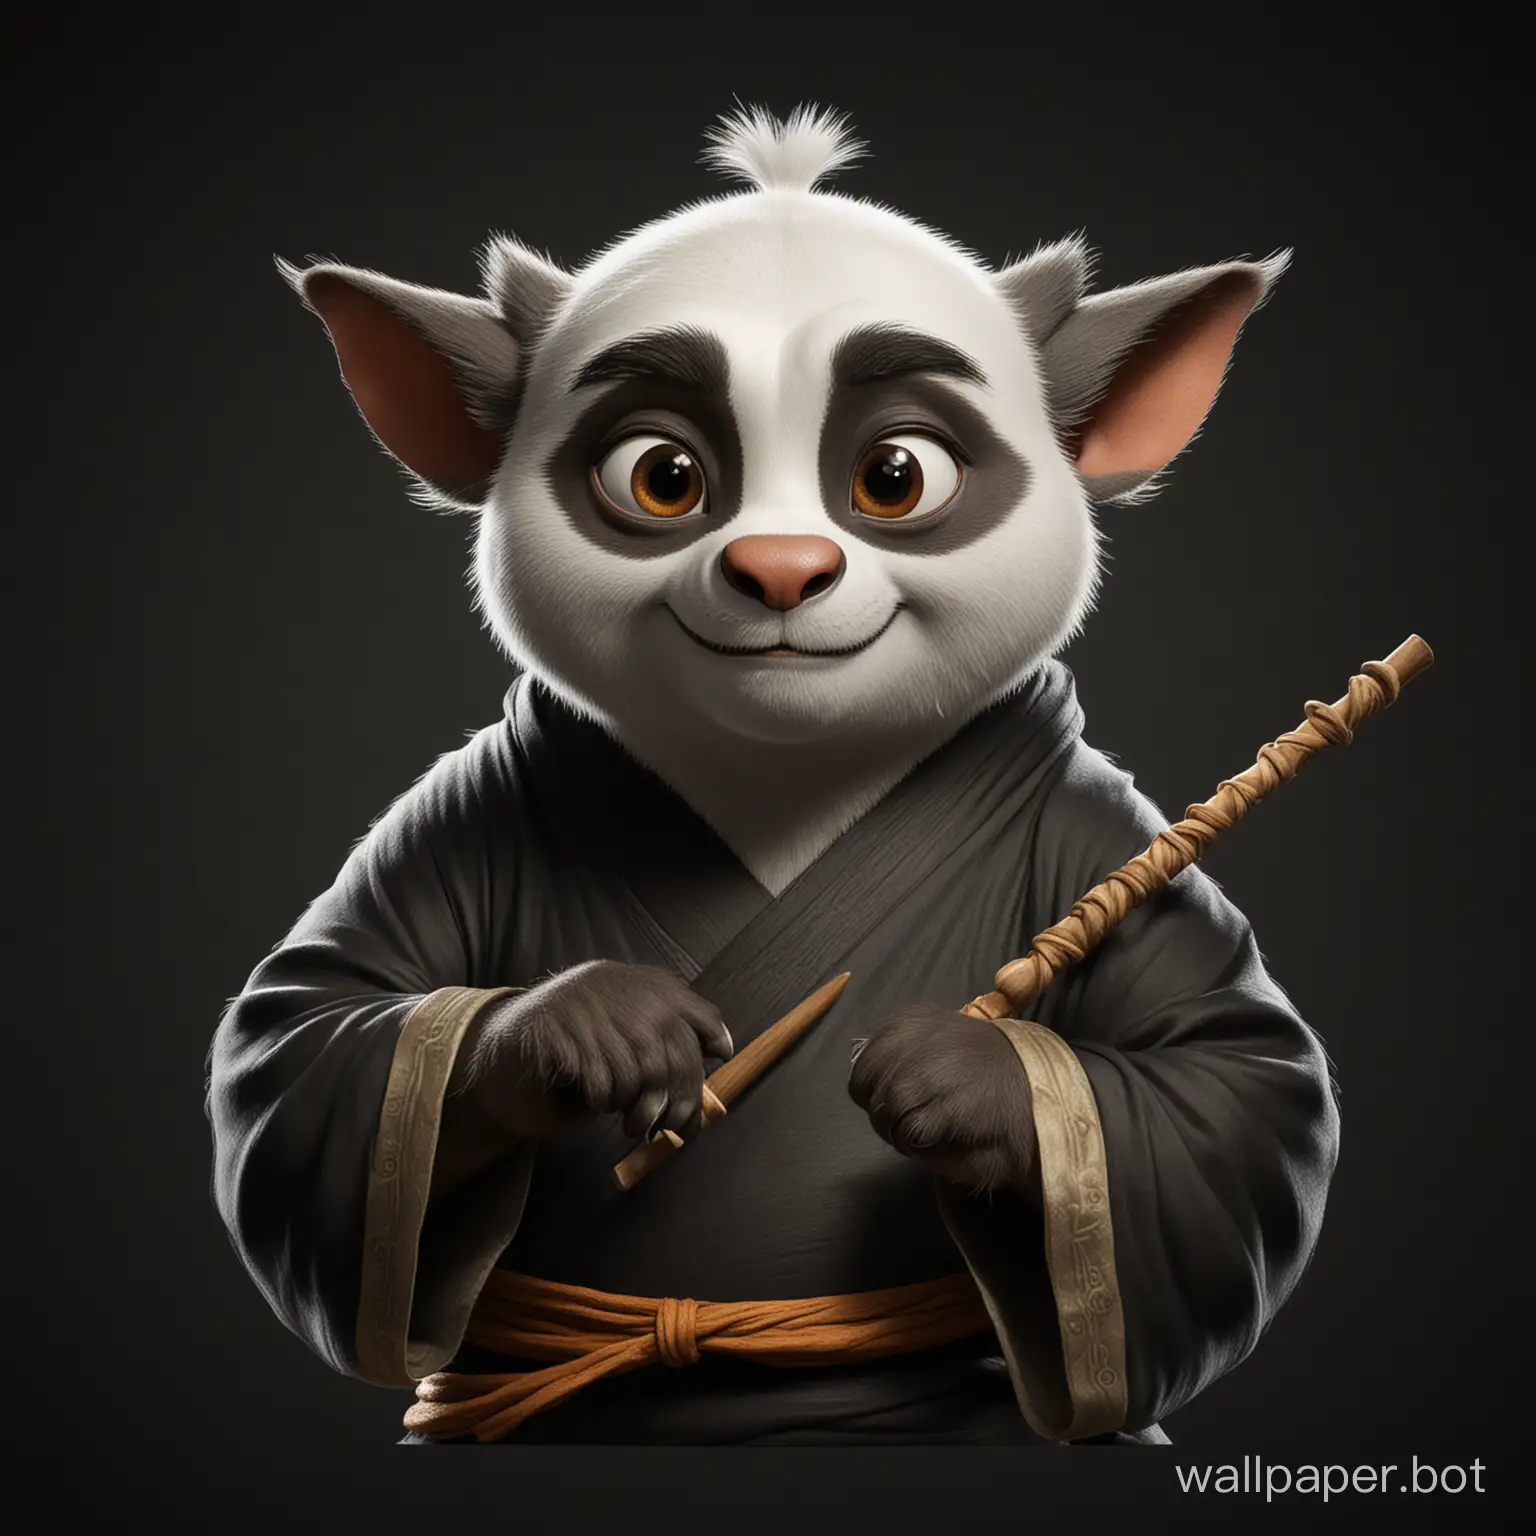 Draw a realistic Master Shifu from the cartoon "Kung Fu Panda" on a black background.